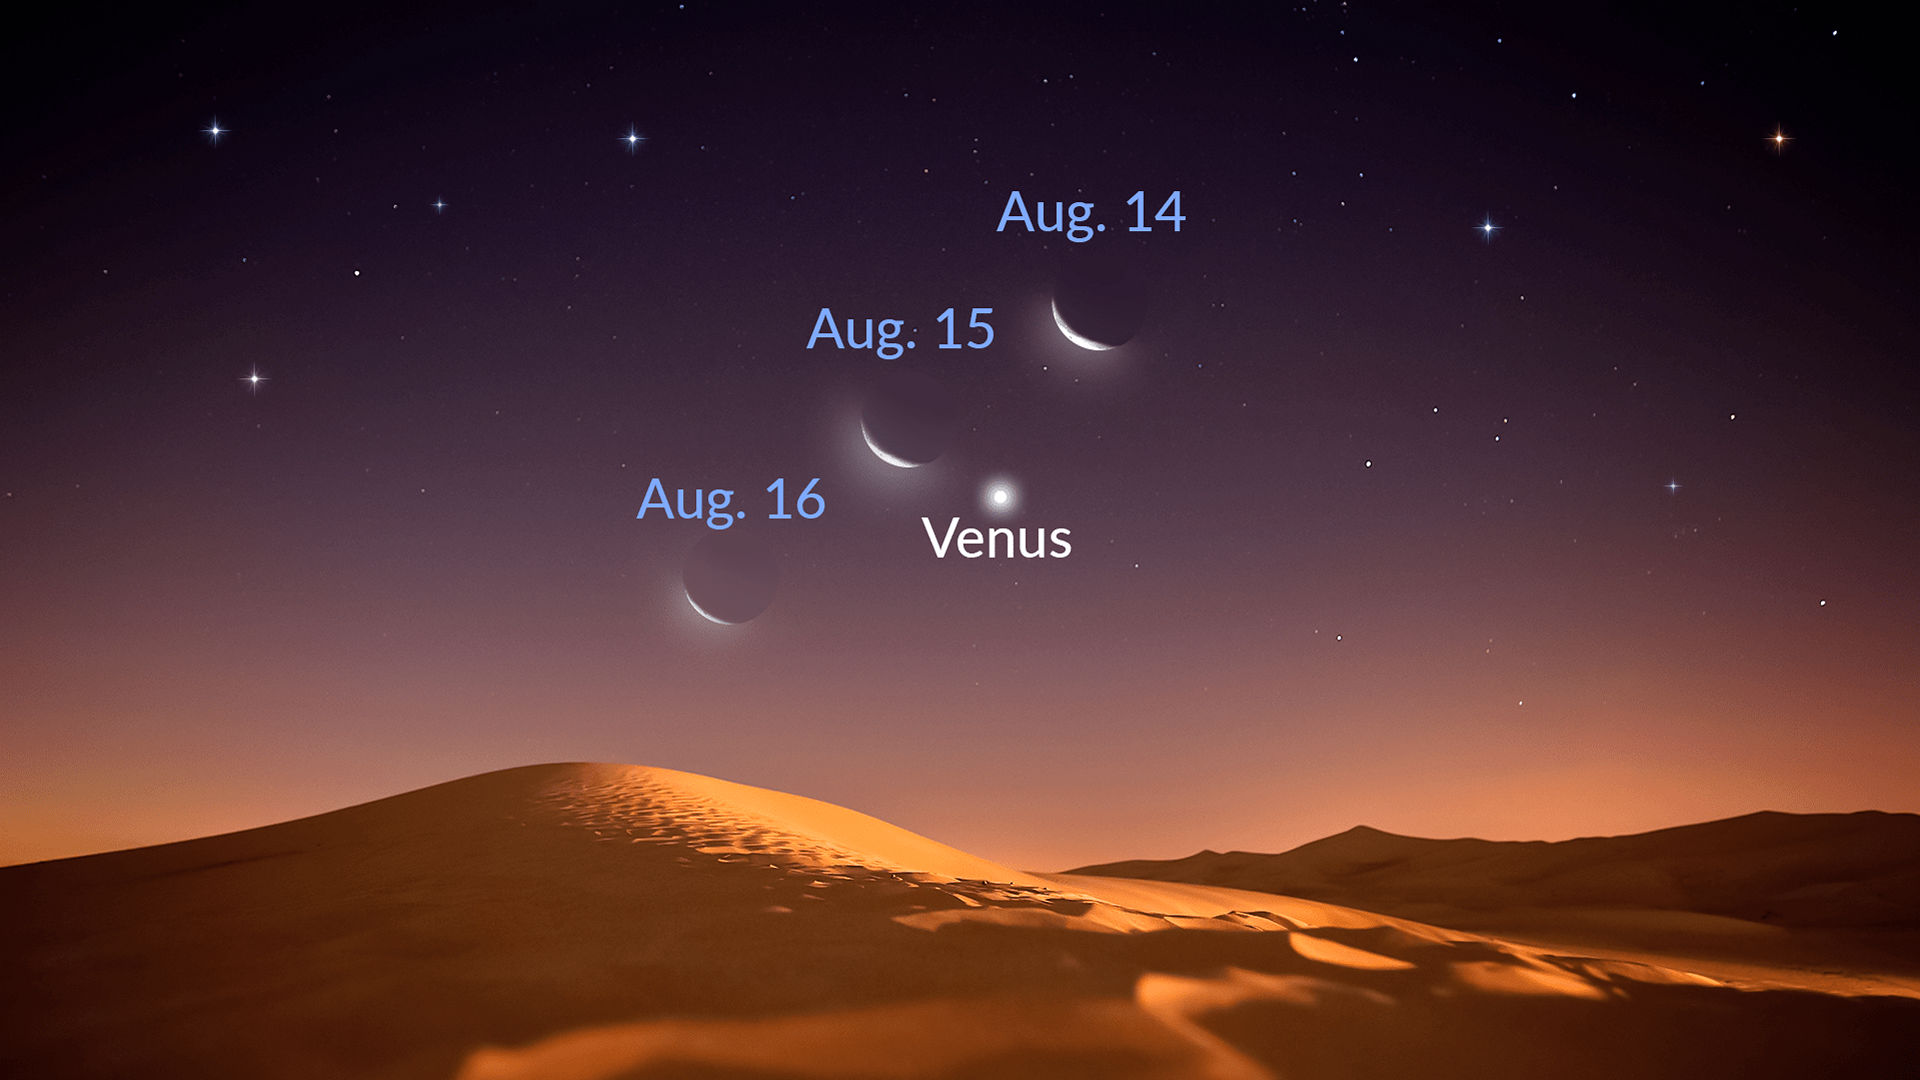 The Moon Joins Brilliant Venus in the August Sky